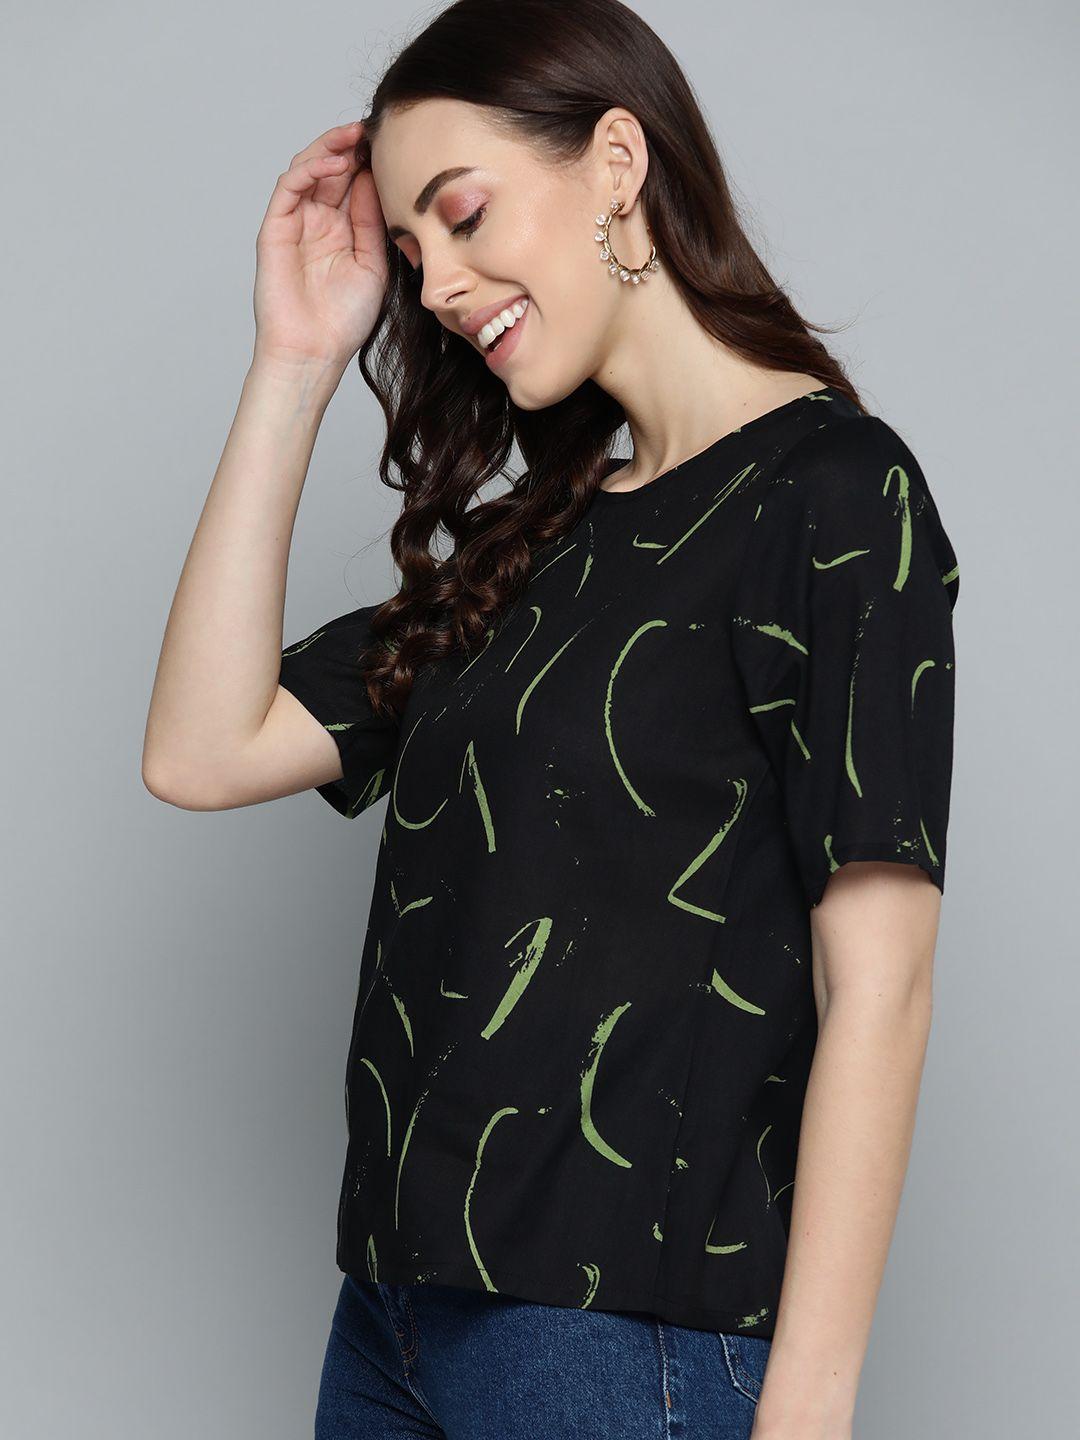 here&now black & green abstract print top